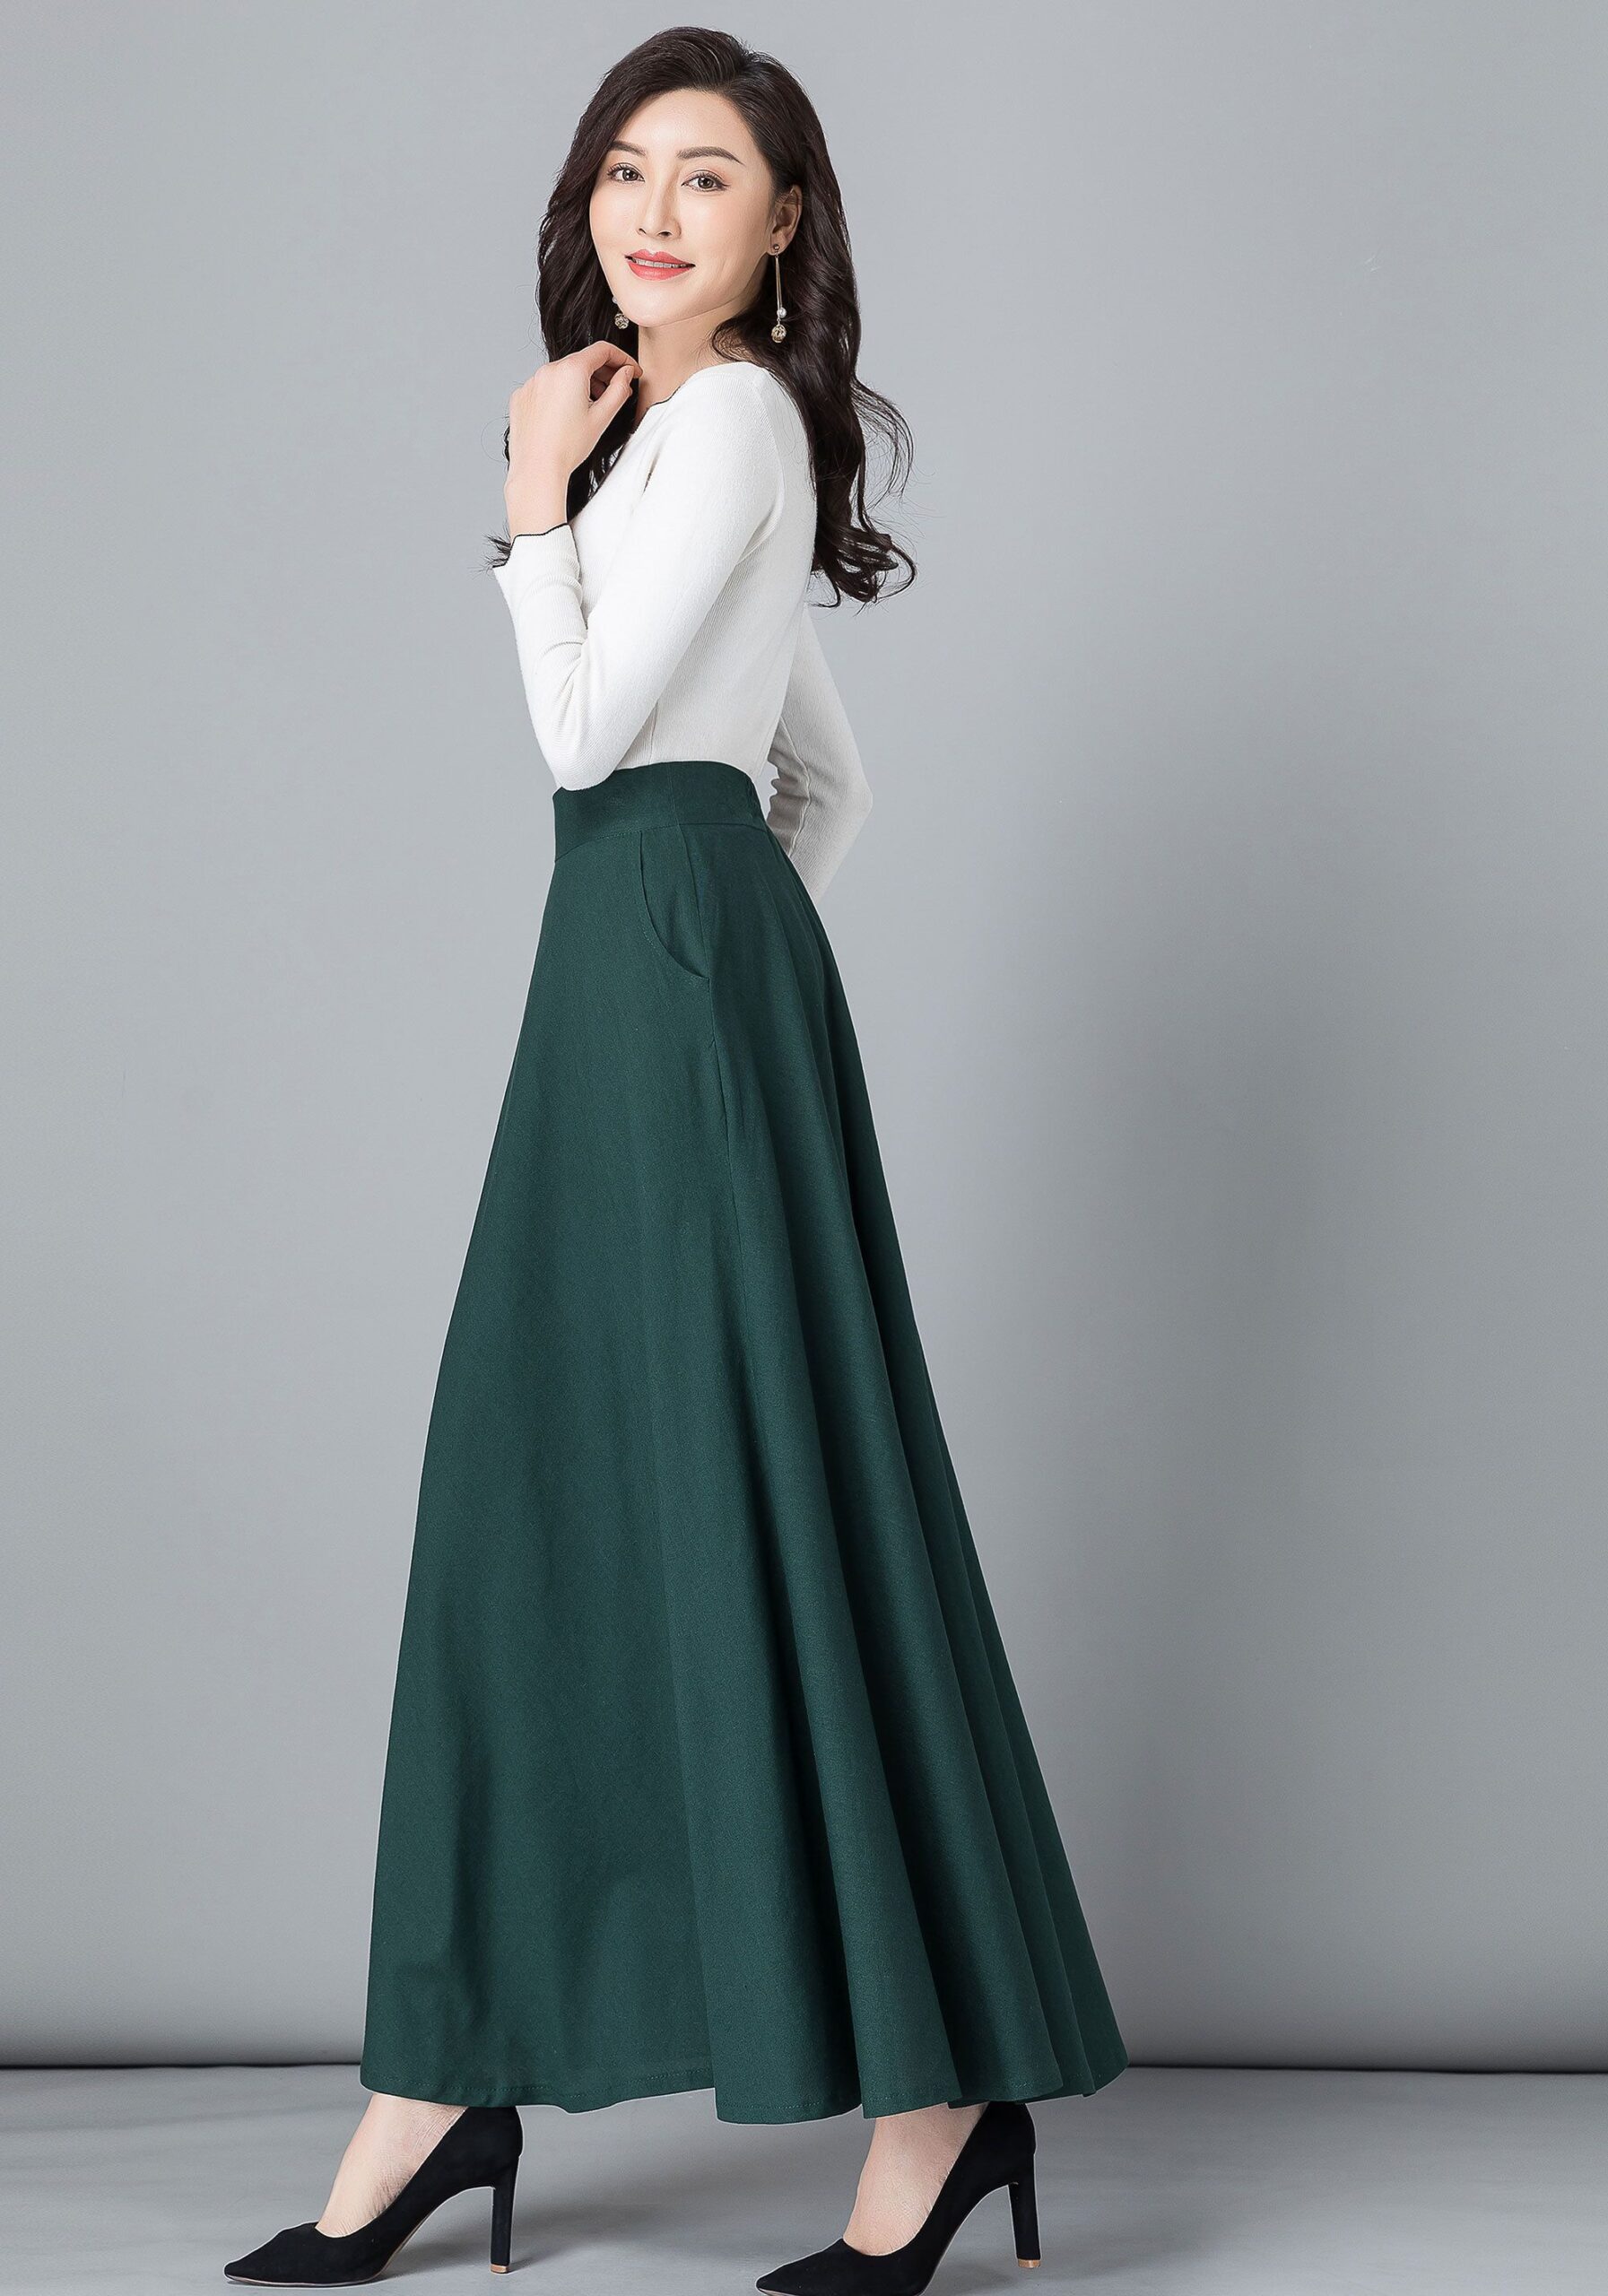 Flattering
Flared Skirts For Day To Day Occasions